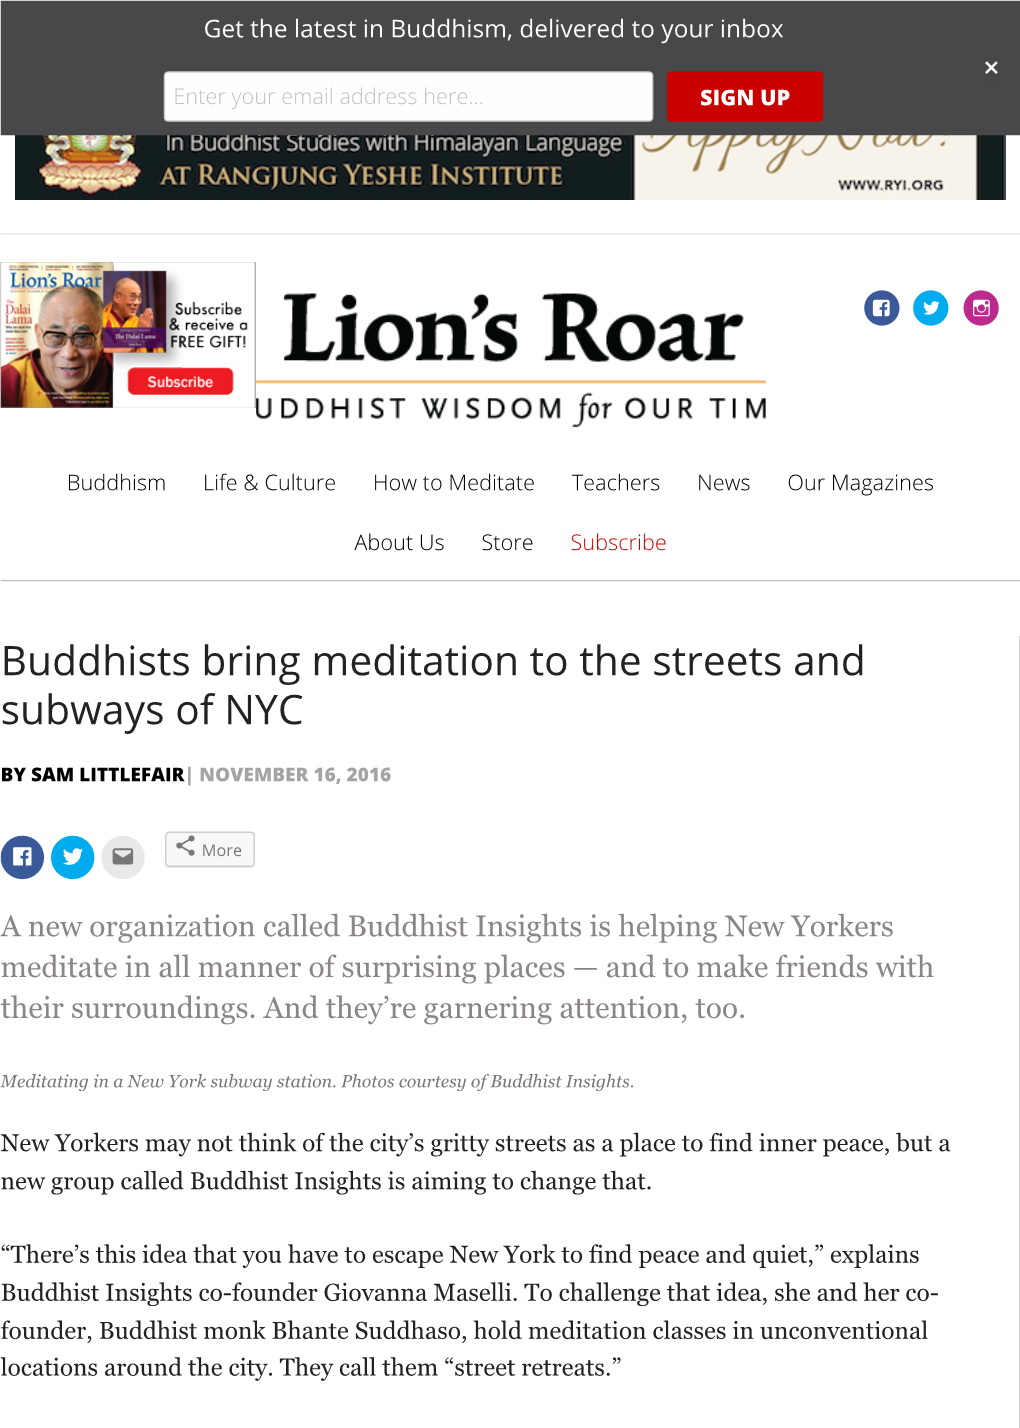 Buddhists Bring Meditation to the Streets and Subways of NYC